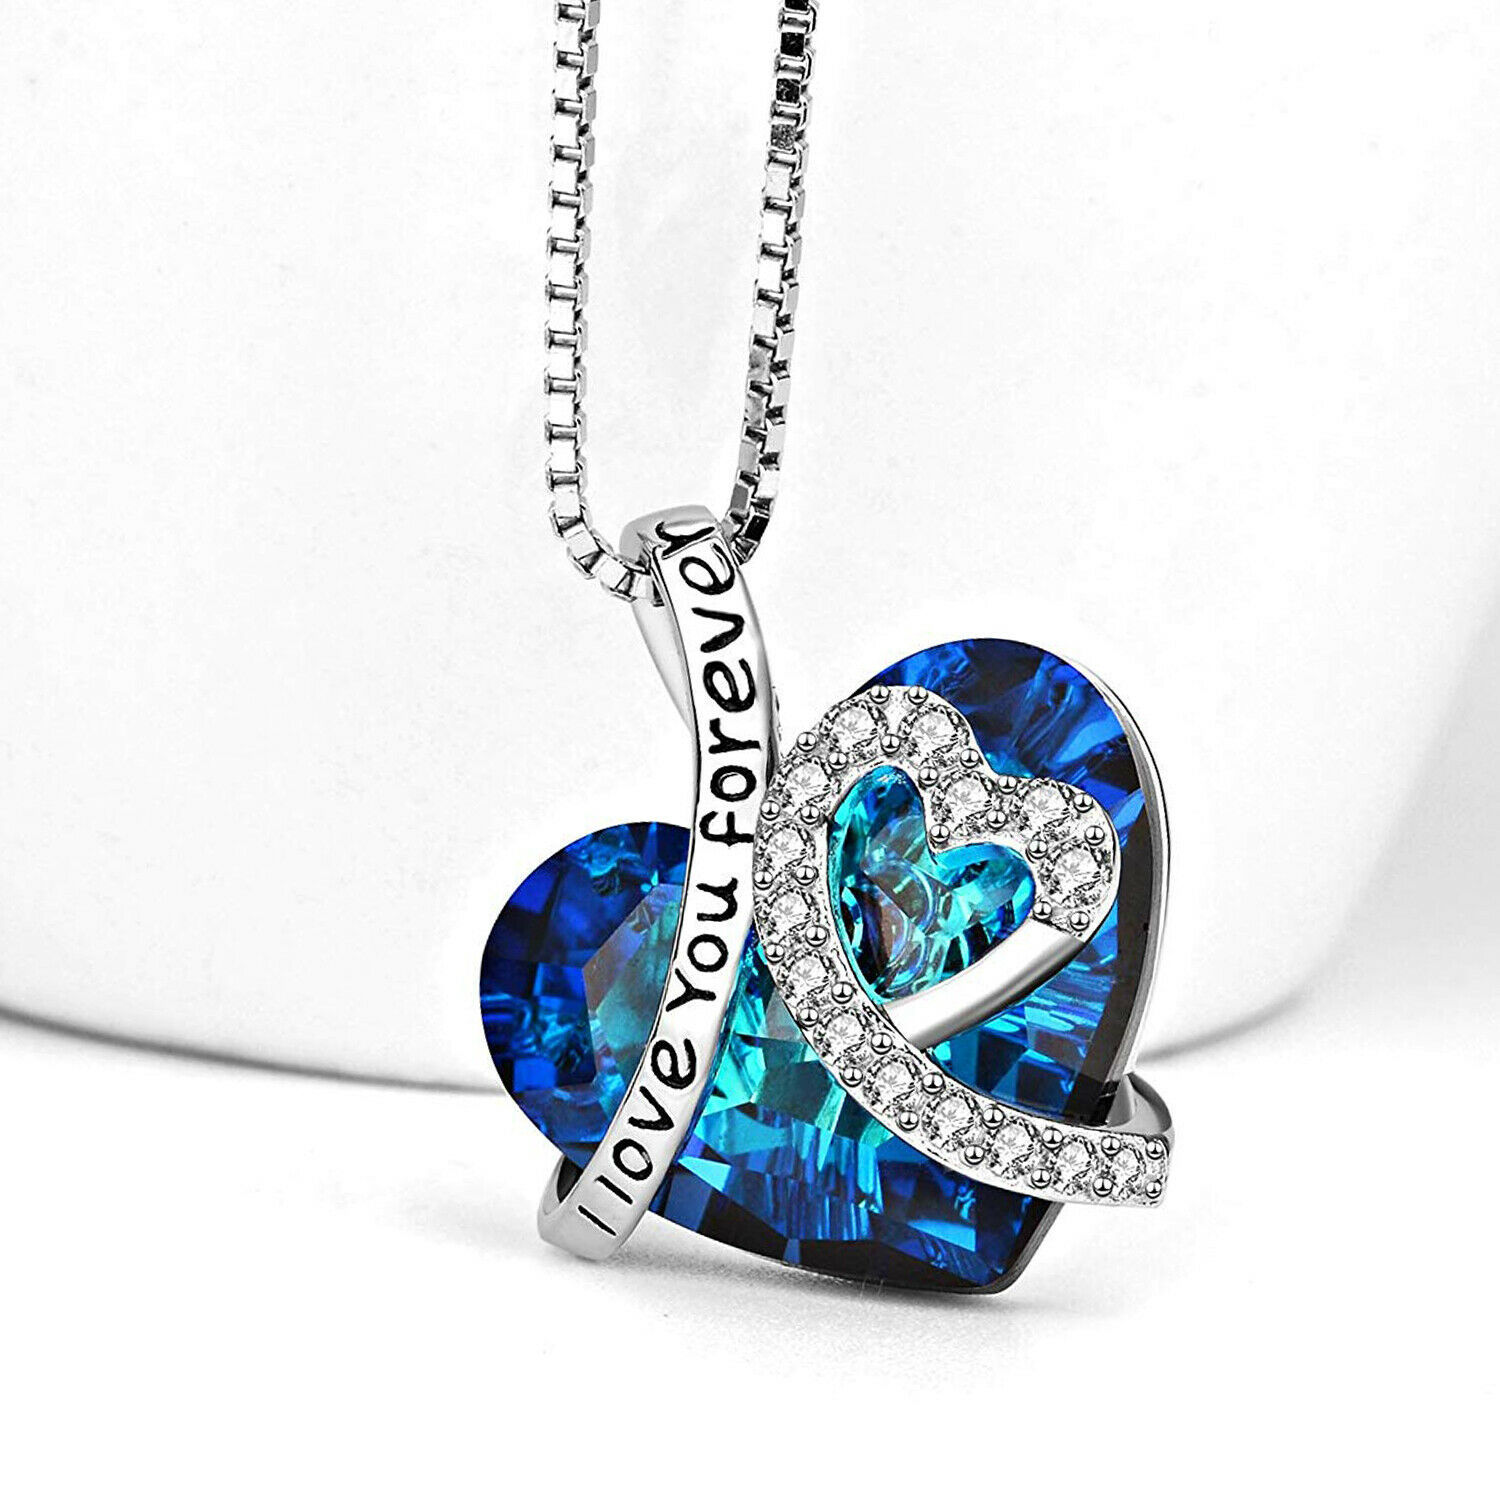 I Love You Forever Heart Pendant Necklace Blue Crystal Silver Filled Chain 17